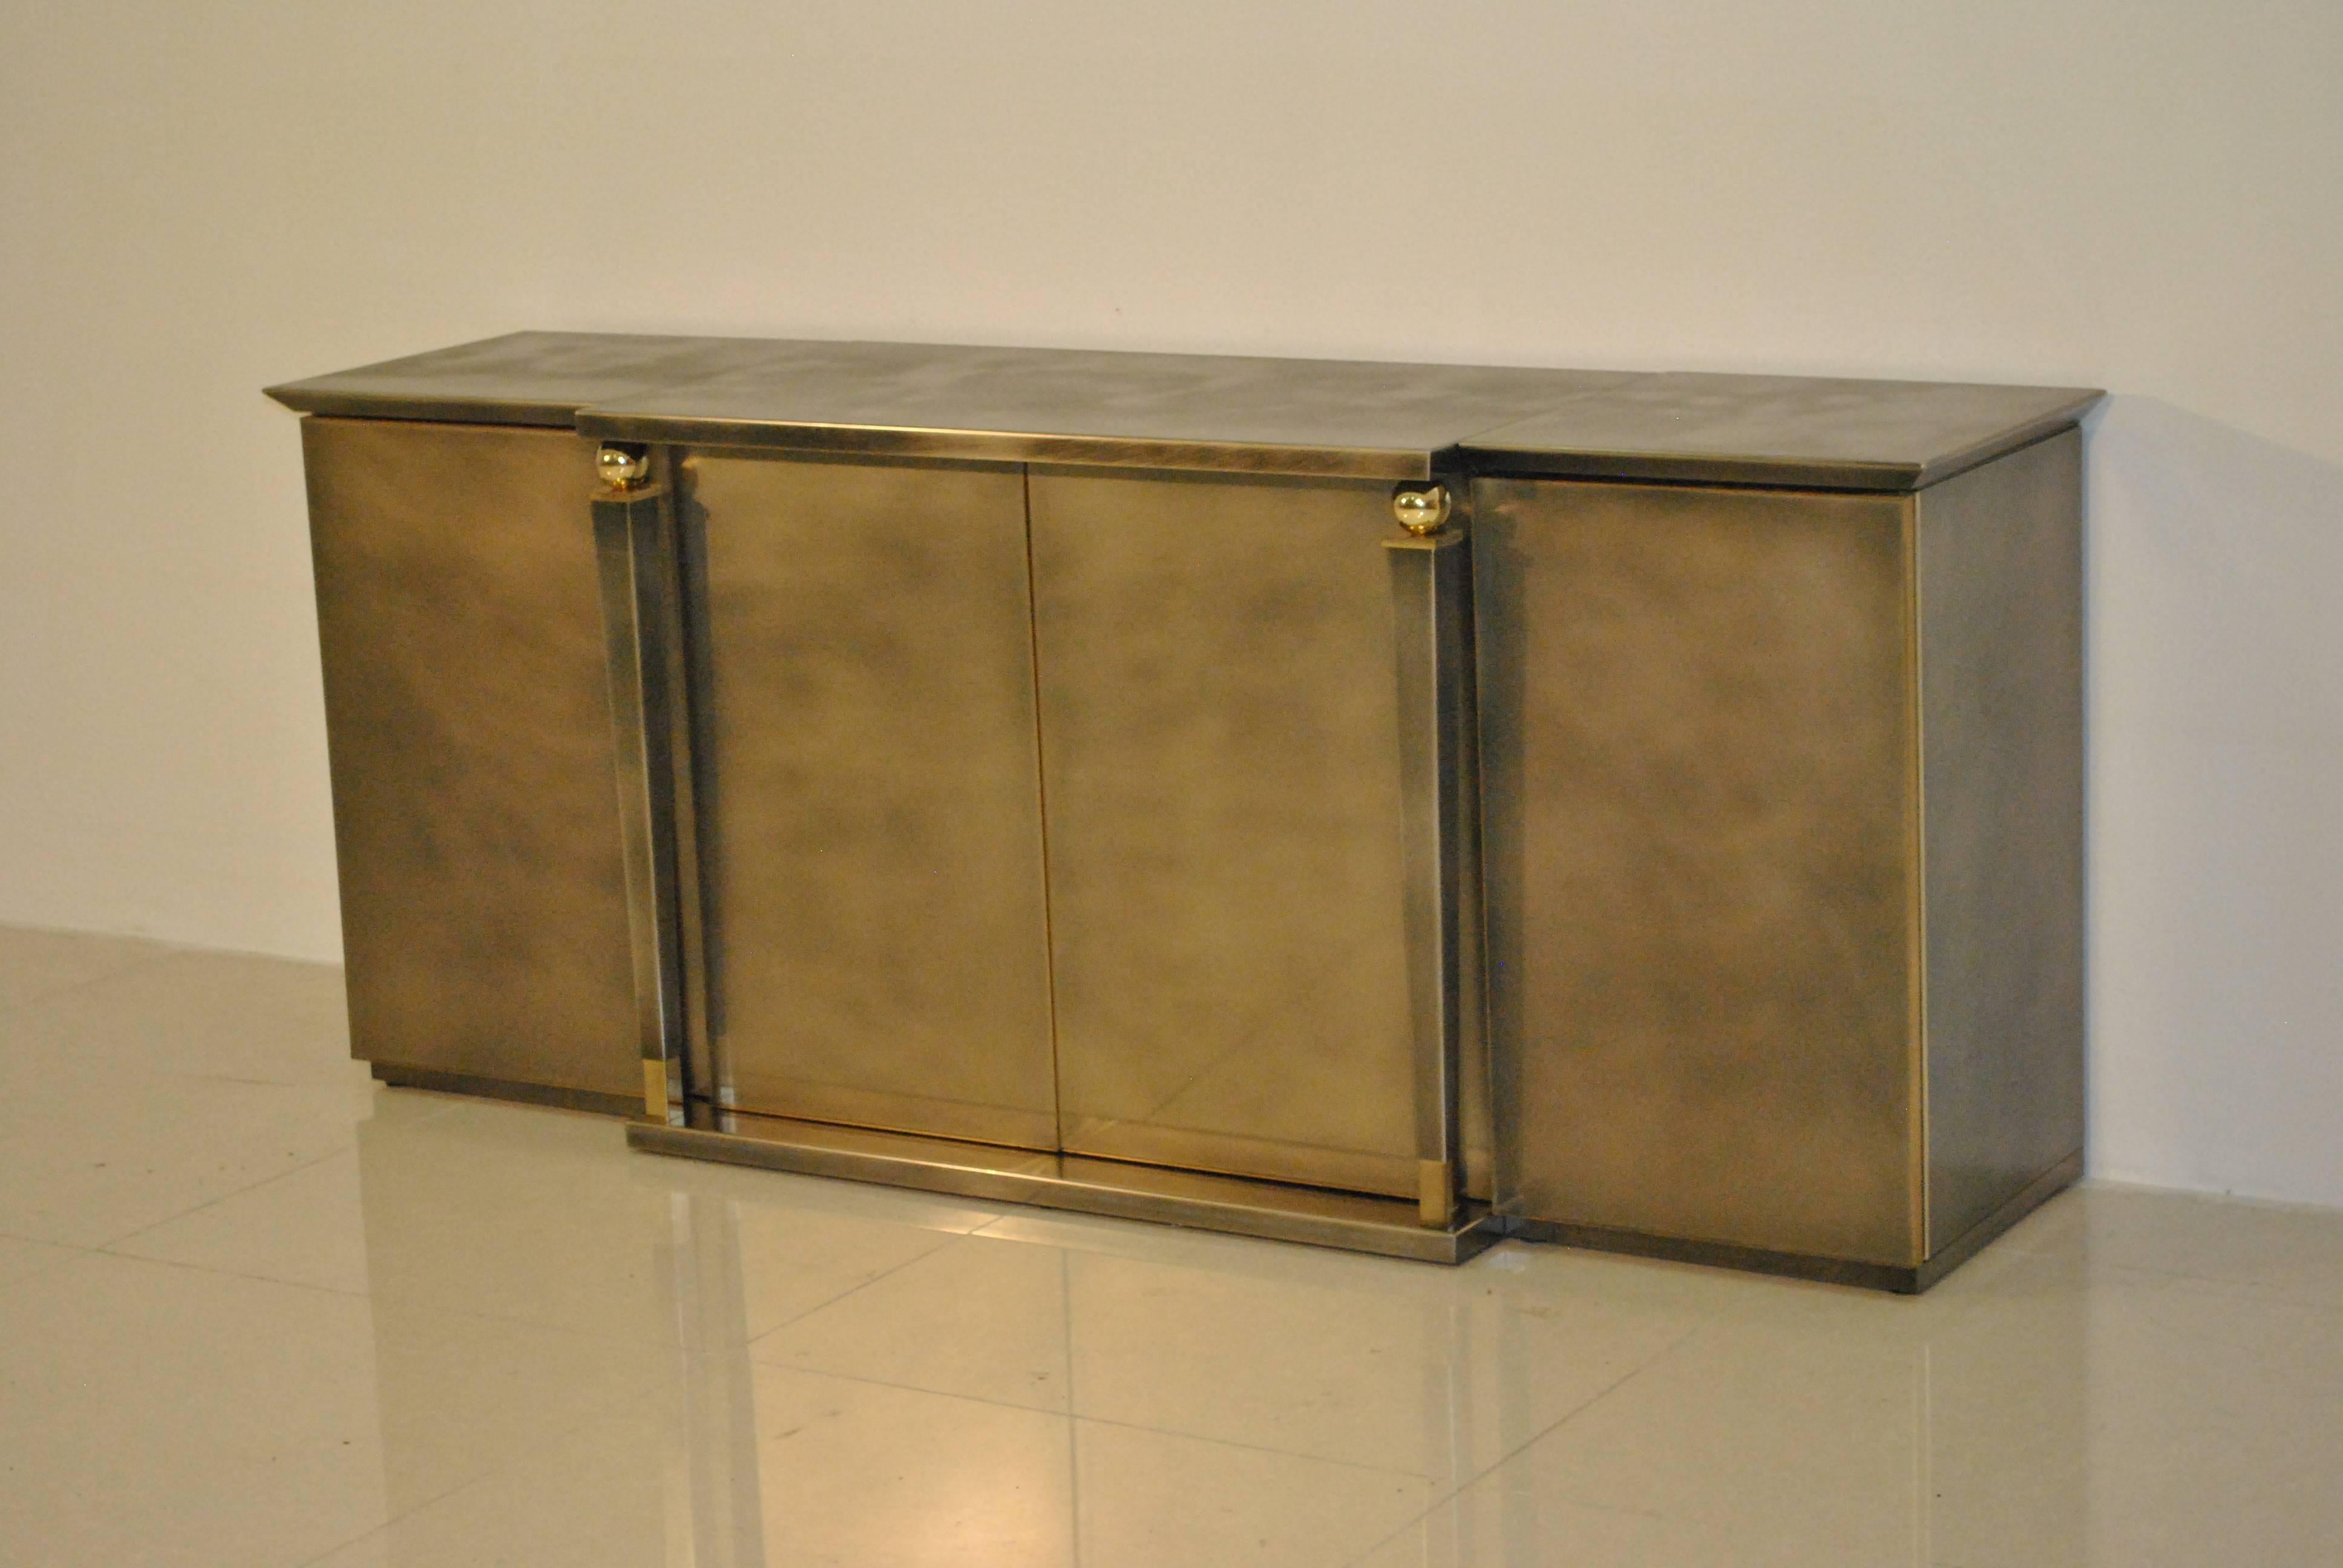 Neoclassical Revival Brushed Steel and Gold Sideboard by Belgo Chrome, 1980s For Sale